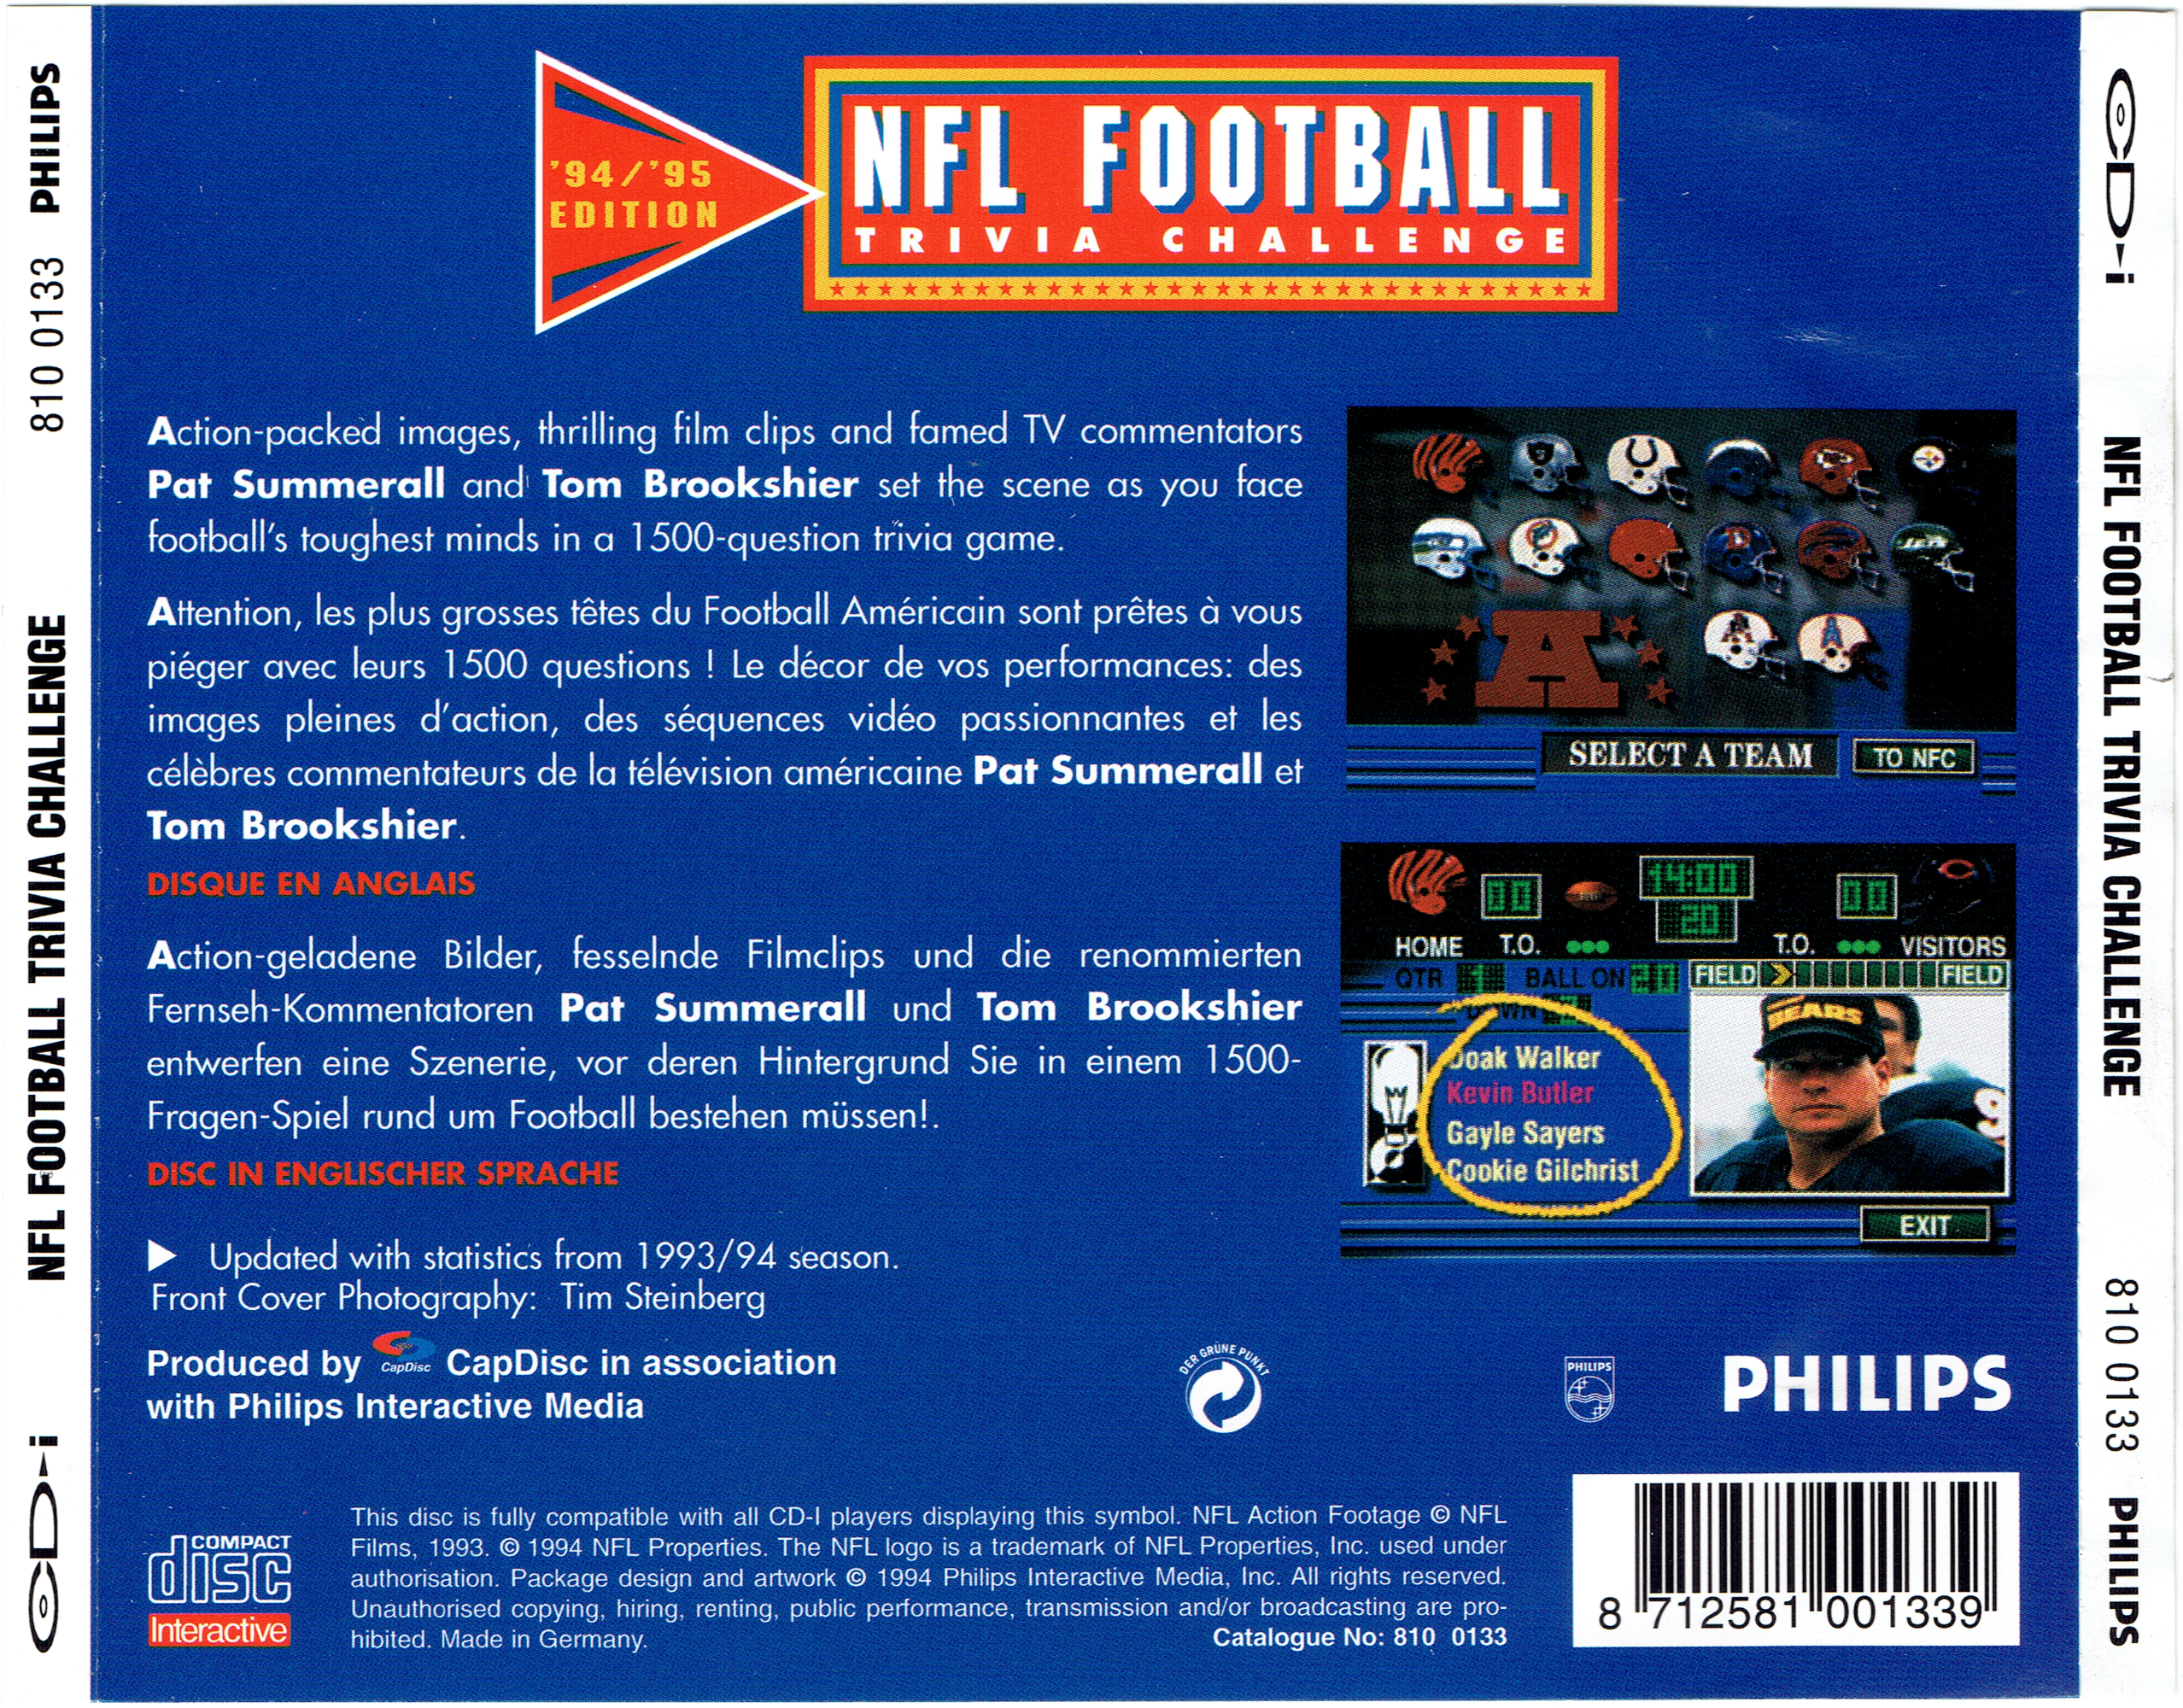 NFL Football Trivia Challenge 94-95 Edition (810 0133) (Europe) [Scans] :  Free Download, Borrow, and Streaming : Internet Archive